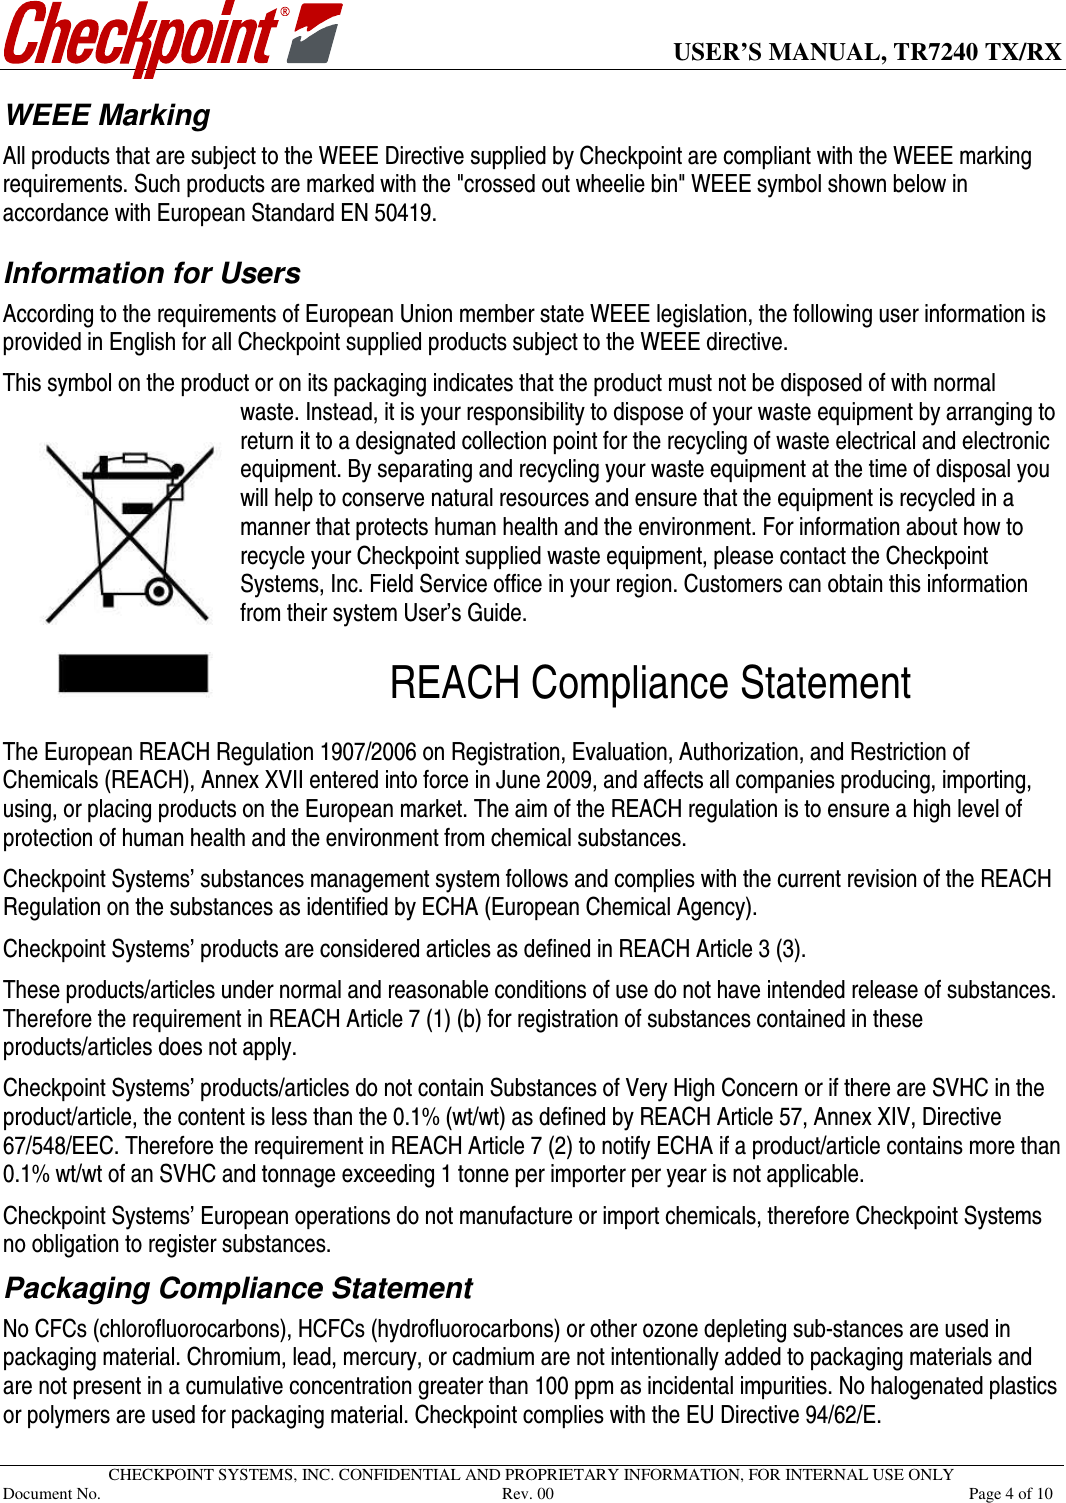      USER’S MANUAL, TR7240 TX/RX   CHECKPOINT SYSTEMS, INC. CONFIDENTIAL AND PROPRIETARY INFORMATION, FOR INTERNAL USE ONLY Document No.     Rev. 00  Page 4 of 10 WEEE Marking  All products that are subject to the WEEE Directive supplied by Checkpoint are compliant with the WEEE marking requirements. Such products are marked with the &quot;crossed out wheelie bin&quot; WEEE symbol shown below in accordance with European Standard EN 50419.   Information for Users  According to the requirements of European Union member state WEEE legislation, the following user information is provided in English for all Checkpoint supplied products subject to the WEEE directive. This symbol on the product or on its packaging indicates that the product must not be disposed of with normal waste. Instead, it is your responsibility to dispose of your waste equipment by arranging to return it to a designated collection point for the recycling of waste electrical and electronic equipment. By separating and recycling your waste equipment at the time of disposal you will help to conserve natural resources and ensure that the equipment is recycled in a manner that protects human health and the environment. For information about how to recycle your Checkpoint supplied waste equipment, please contact the Checkpoint Systems, Inc. Field Service office in your region. Customers can obtain this information from their system User’s Guide.  REACH Compliance Statement  The European REACH Regulation 1907/2006 on Registration, Evaluation, Authorization, and Restriction of Chemicals (REACH), Annex XVII entered into force in June 2009, and affects all companies producing, importing, using, or placing products on the European market. The aim of the REACH regulation is to ensure a high level of protection of human health and the environment from chemical substances. Checkpoint Systems’ substances management system follows and complies with the current revision of the REACH Regulation on the substances as identified by ECHA (European Chemical Agency).  Checkpoint Systems’ products are considered articles as defined in REACH Article 3 (3).  These products/articles under normal and reasonable conditions of use do not have intended release of substances. Therefore the requirement in REACH Article 7 (1) (b) for registration of substances contained in these products/articles does not apply.  Checkpoint Systems’ products/articles do not contain Substances of Very High Concern or if there are SVHC in the product/article, the content is less than the 0.1% (wt/wt) as defined by REACH Article 57, Annex XIV, Directive 67/548/EEC. Therefore the requirement in REACH Article 7 (2) to notify ECHA if a product/article contains more than 0.1% wt/wt of an SVHC and tonnage exceeding 1 tonne per importer per year is not applicable. Checkpoint Systems’ European operations do not manufacture or import chemicals, therefore Checkpoint Systems no obligation to register substances. Packaging Compliance Statement  No CFCs (chlorofluorocarbons), HCFCs (hydrofluorocarbons) or other ozone depleting sub-stances are used in packaging material. Chromium, lead, mercury, or cadmium are not intentionally added to packaging materials and are not present in a cumulative concentration greater than 100 ppm as incidental impurities. No halogenated plastics or polymers are used for packaging material. Checkpoint complies with the EU Directive 94/62/E. 